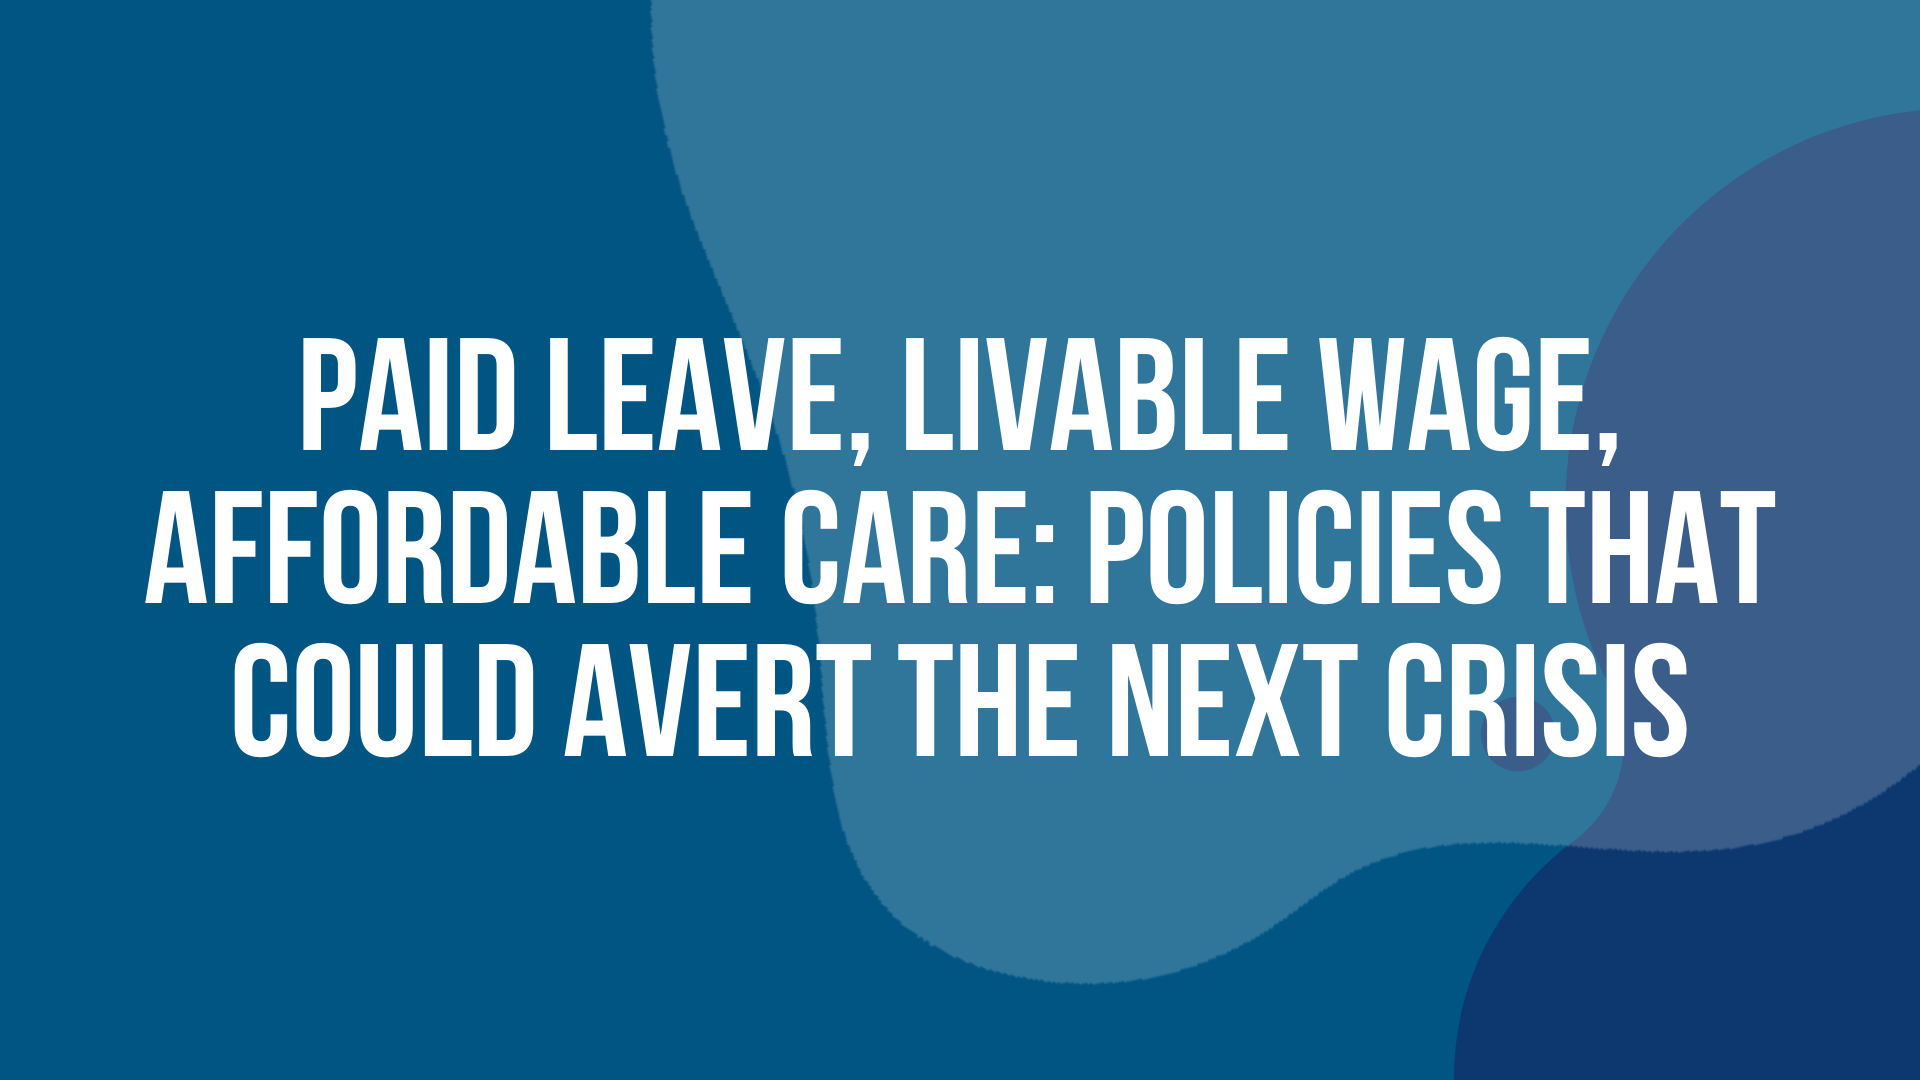 Paid Leave, Livable Wage, Affordable Care: Policies that Could Avert the Next Crisis